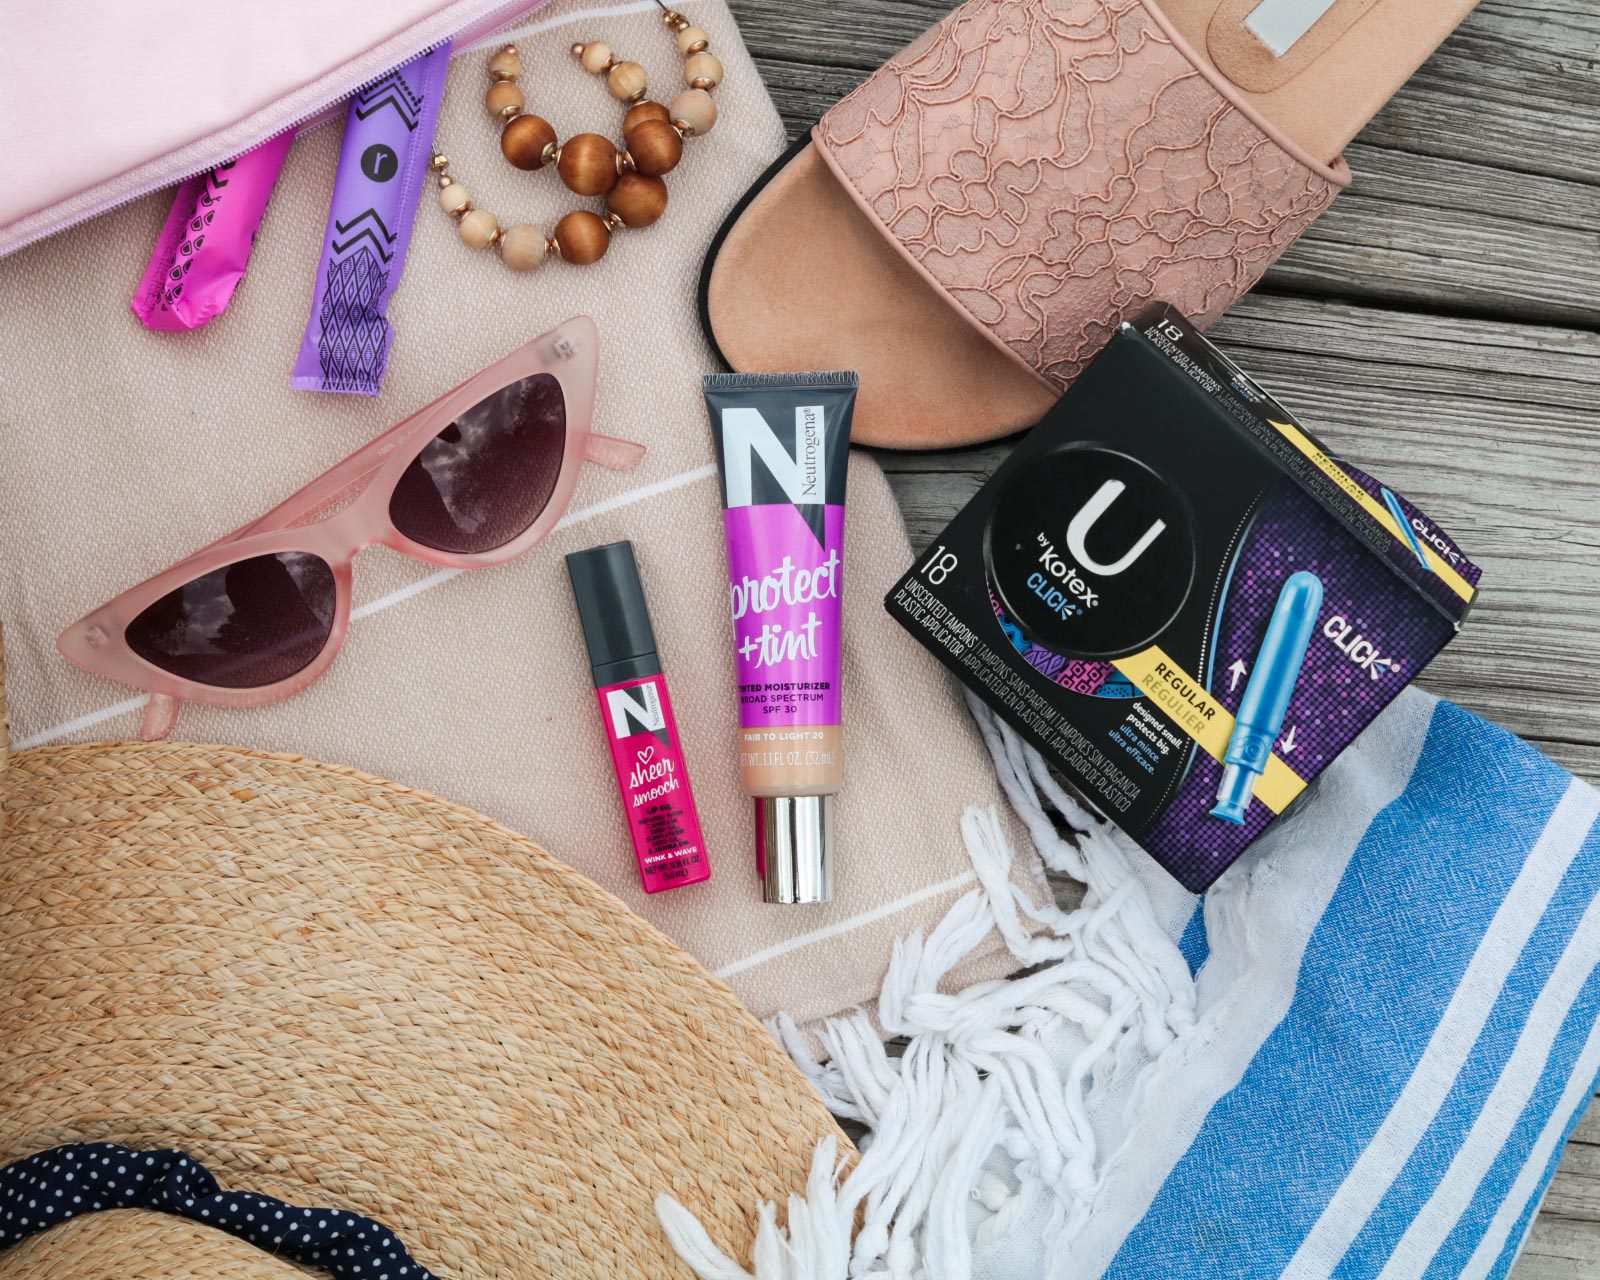 summer packing list must-haves for any getaway weekend